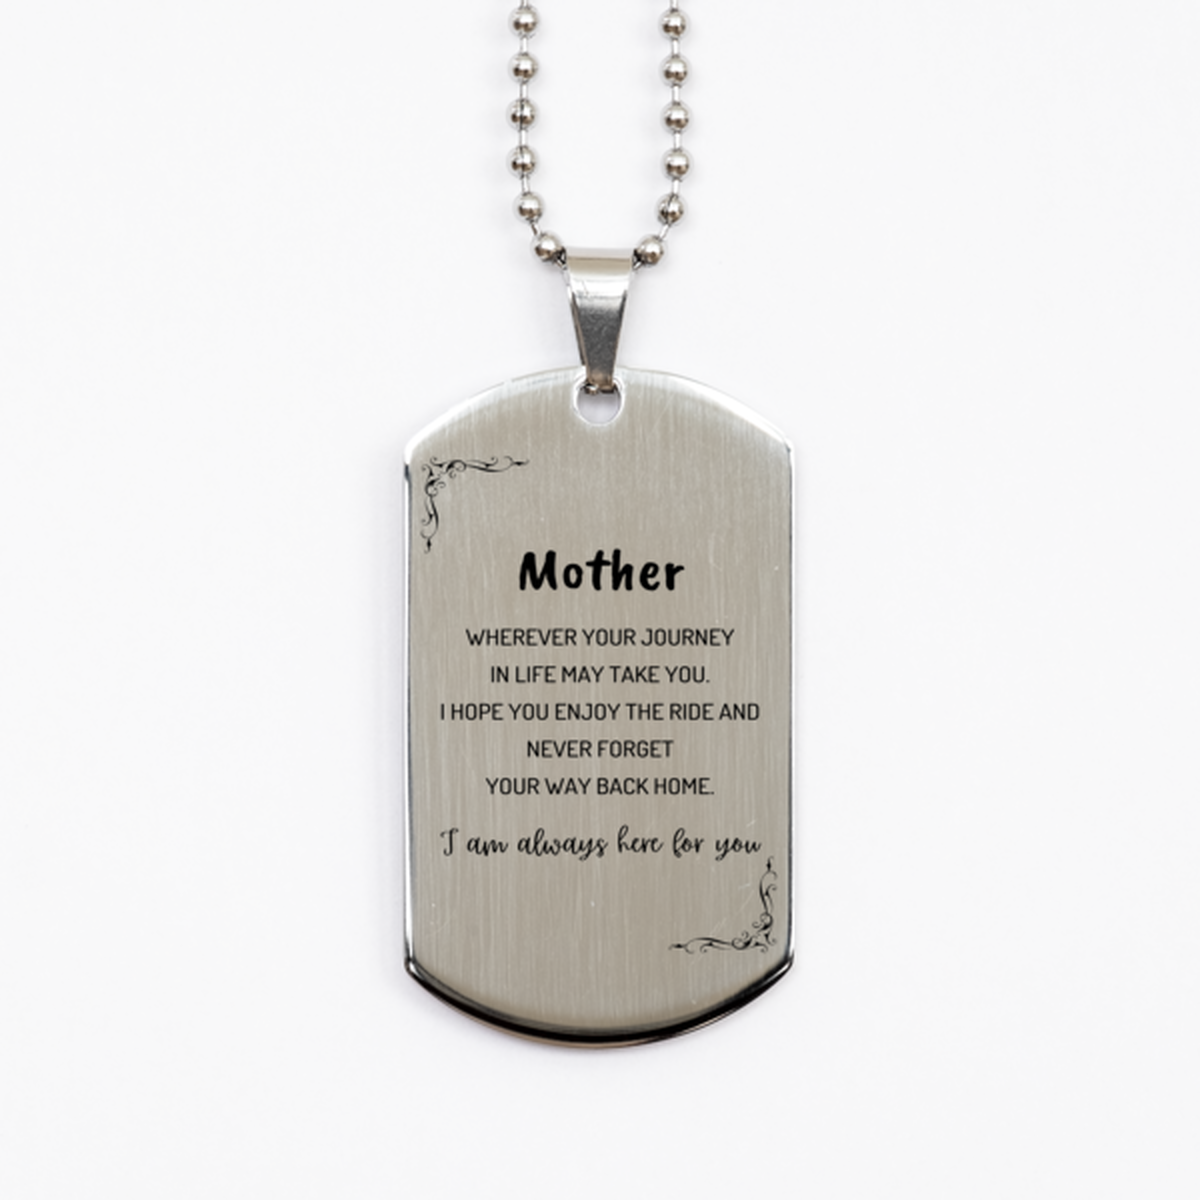 Mother wherever your journey in life may take you, I am always here for you Mother Silver Dog Tag, Awesome Christmas Gifts For Mother, Mother Birthday Gifts for Men Women Family Loved One